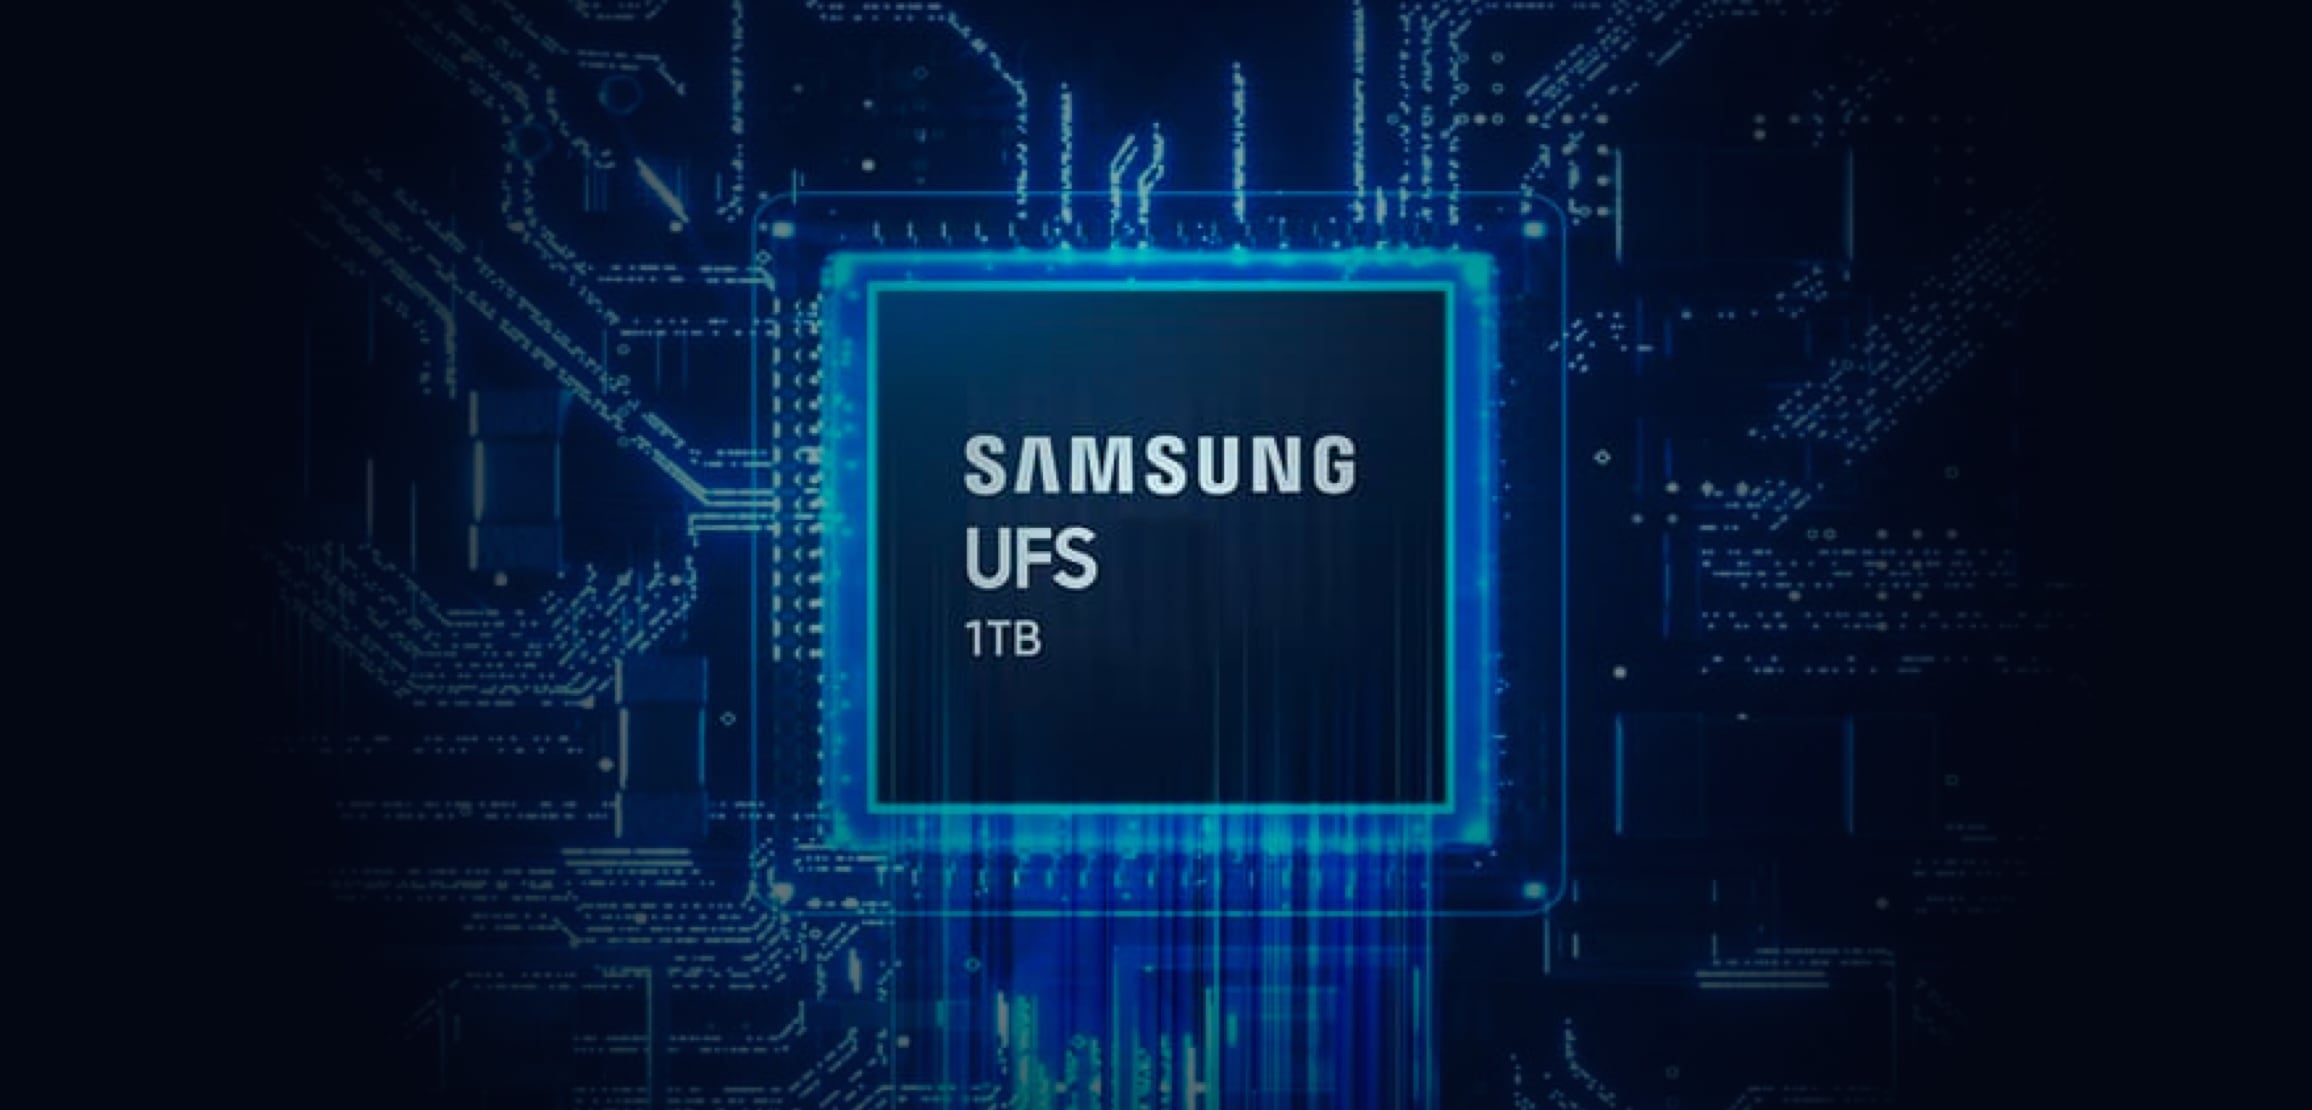 Samsung's UFS 3.0 enhances movie downloads, multitasking, and IoT connectivity, offering speeds up to 4x faster than SATA SSDs with sequential read/write capabilities of 2,100/900MB/s.